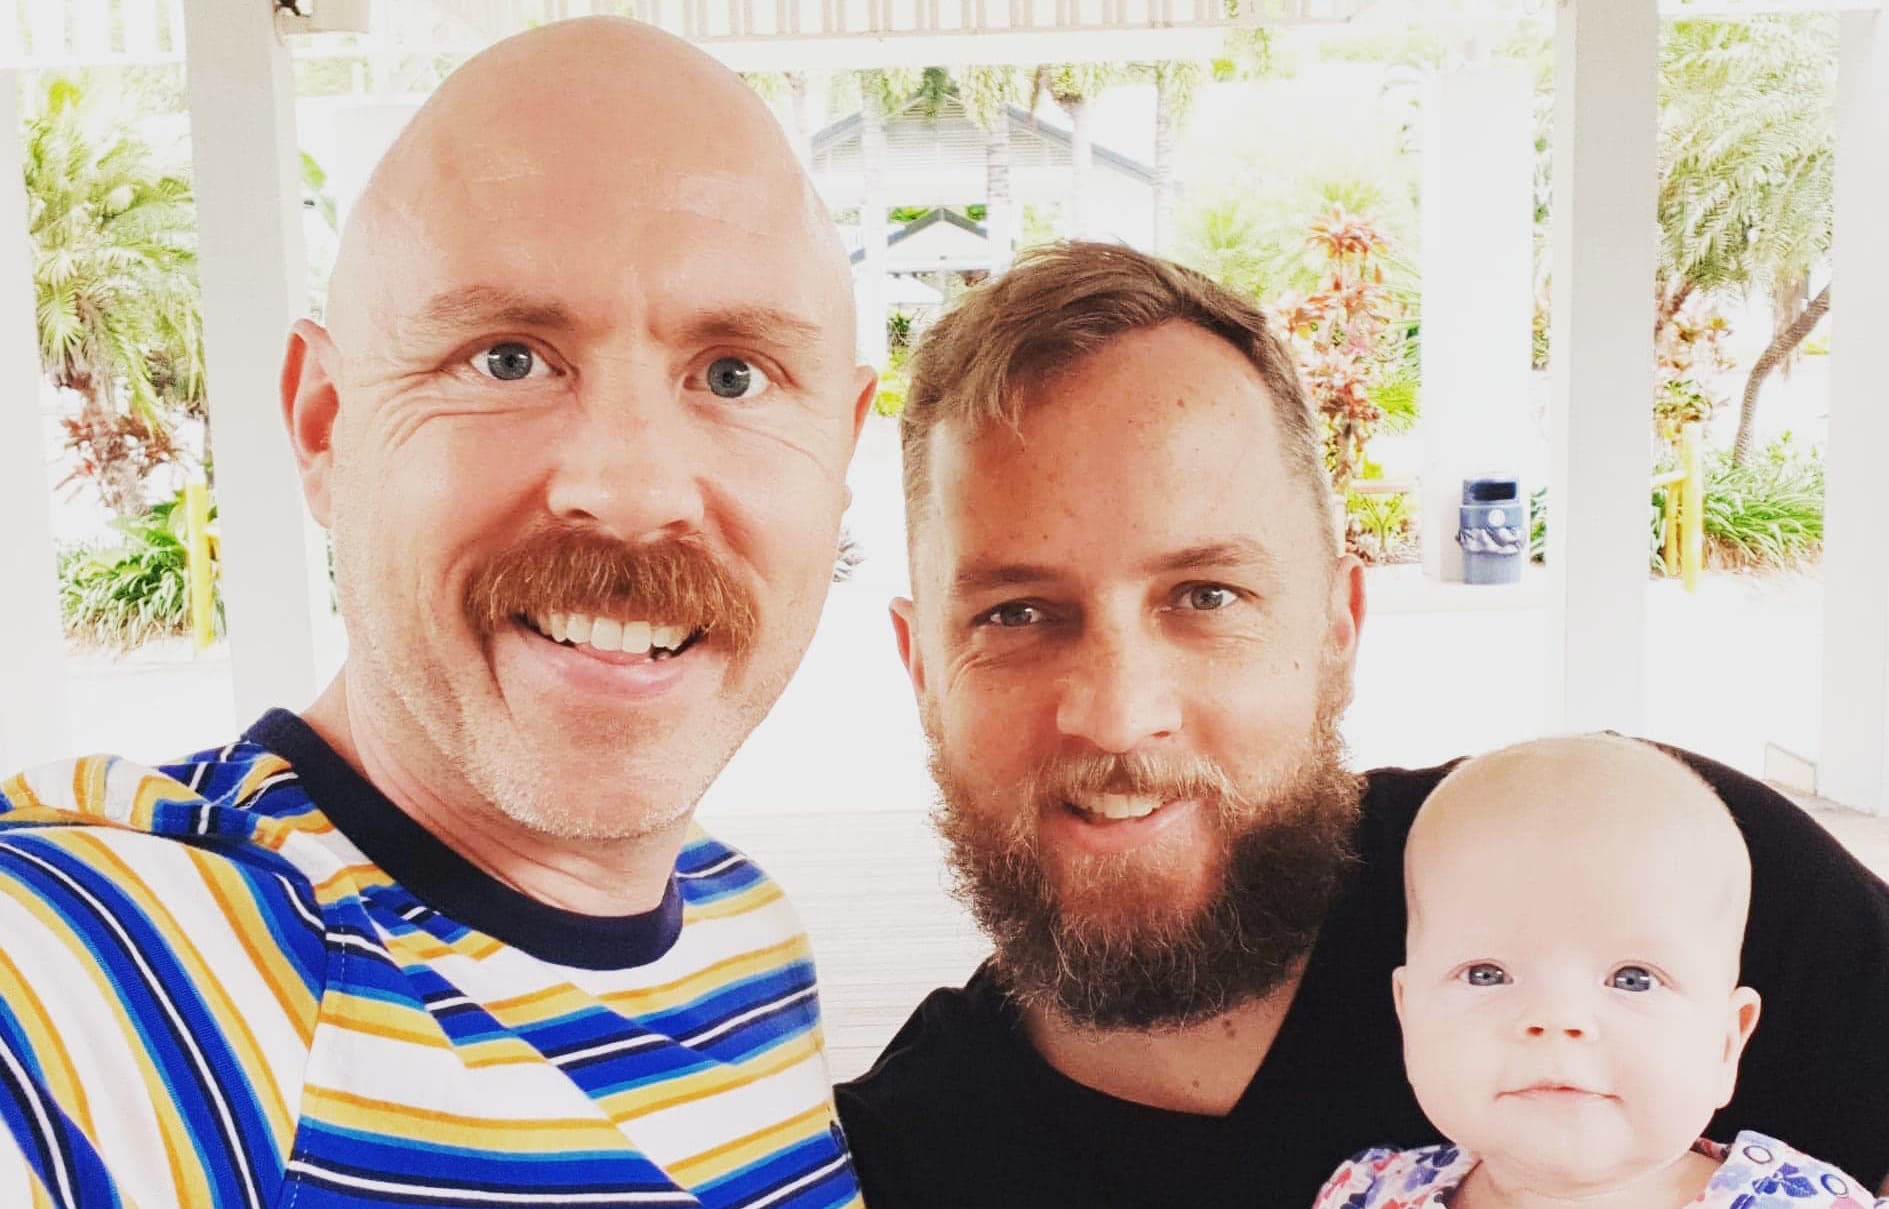 Second time lucky: two gay dads’ homegrown surrogacy story